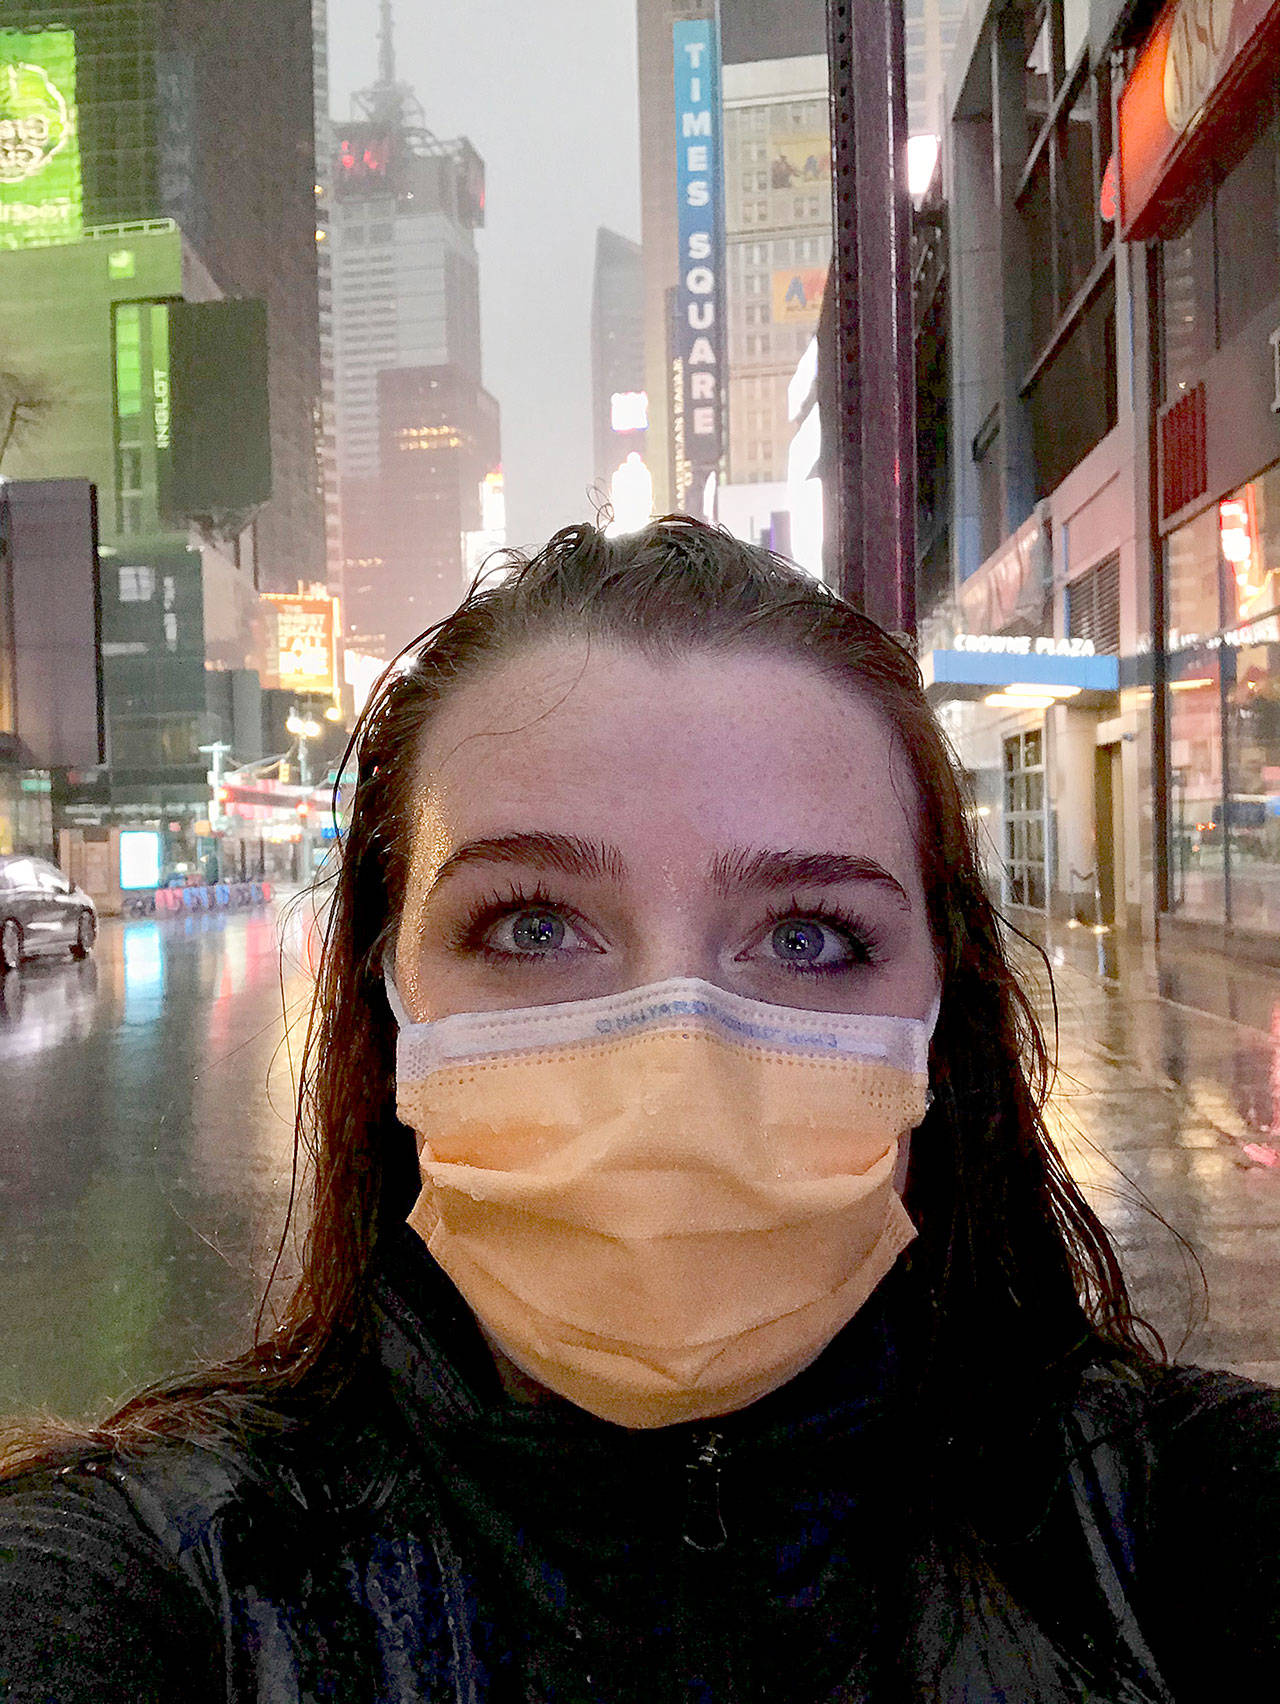 Christina Greenway poses in Times Square. She was in New York to serve as reinforcement for nurses in the city’s response to an overwhelmed medical system. (Courtesy photos)